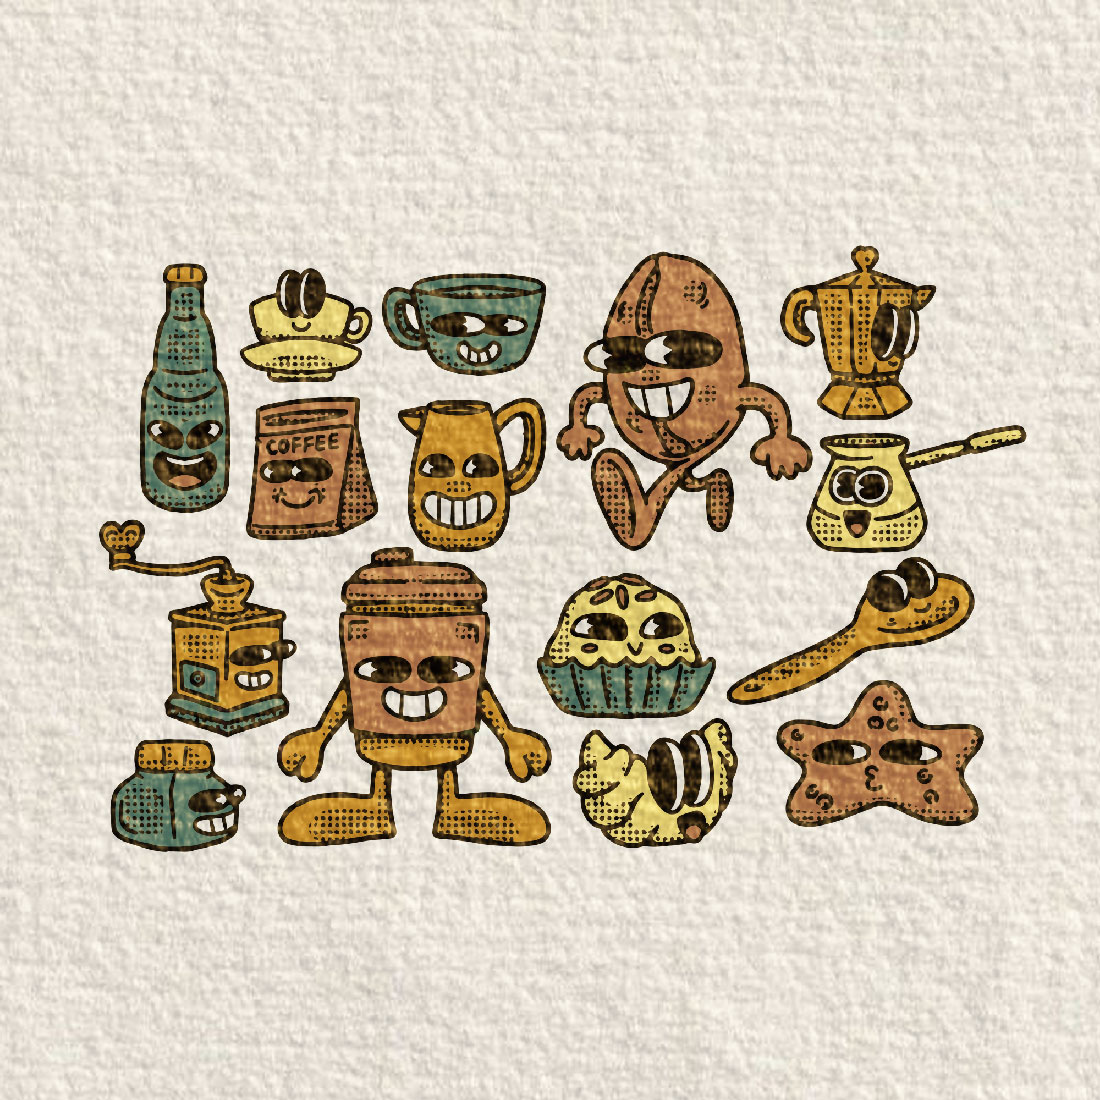 Coffee Boy Character Design cover image.